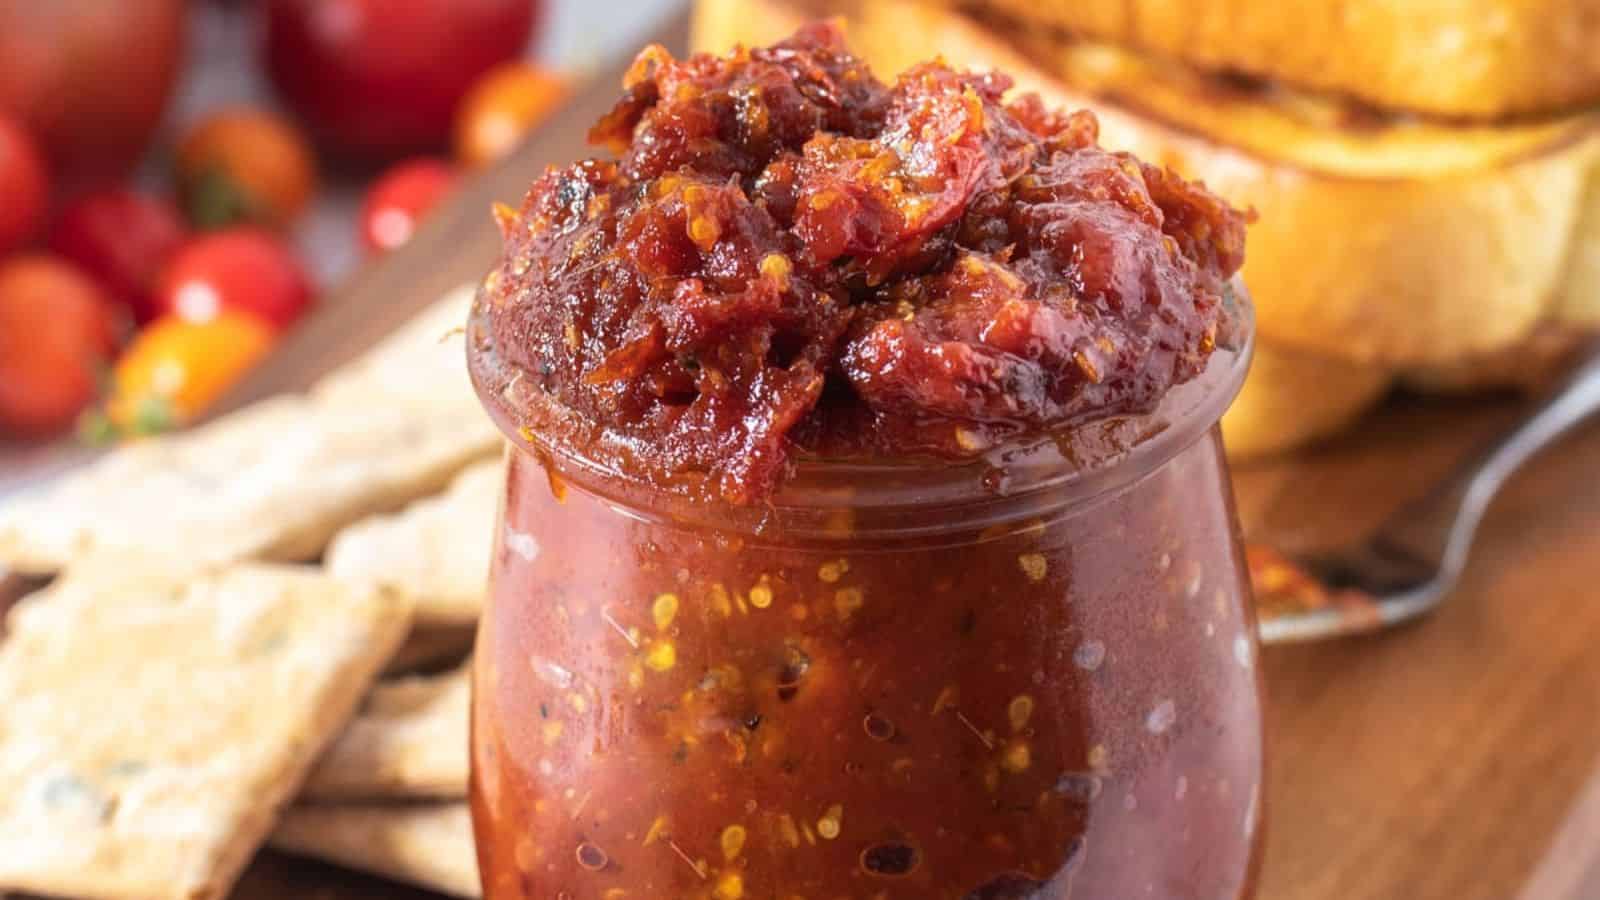 A close up image of  a glass jar filled with tomato miso jam sits on a wooden board.